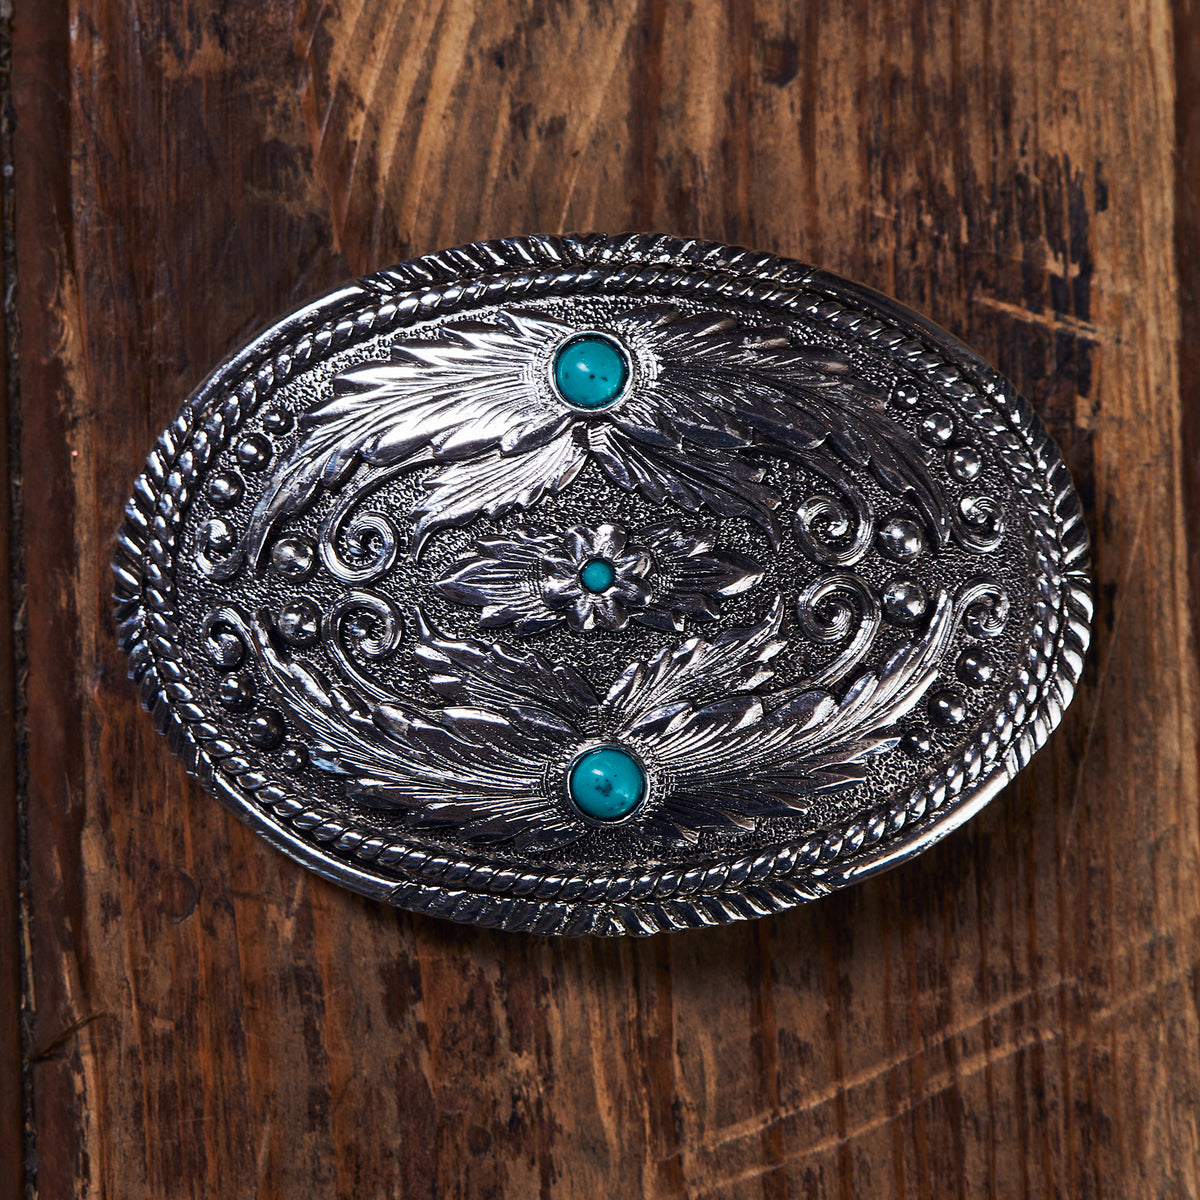 Fancy Feather Buckle with Turquoise